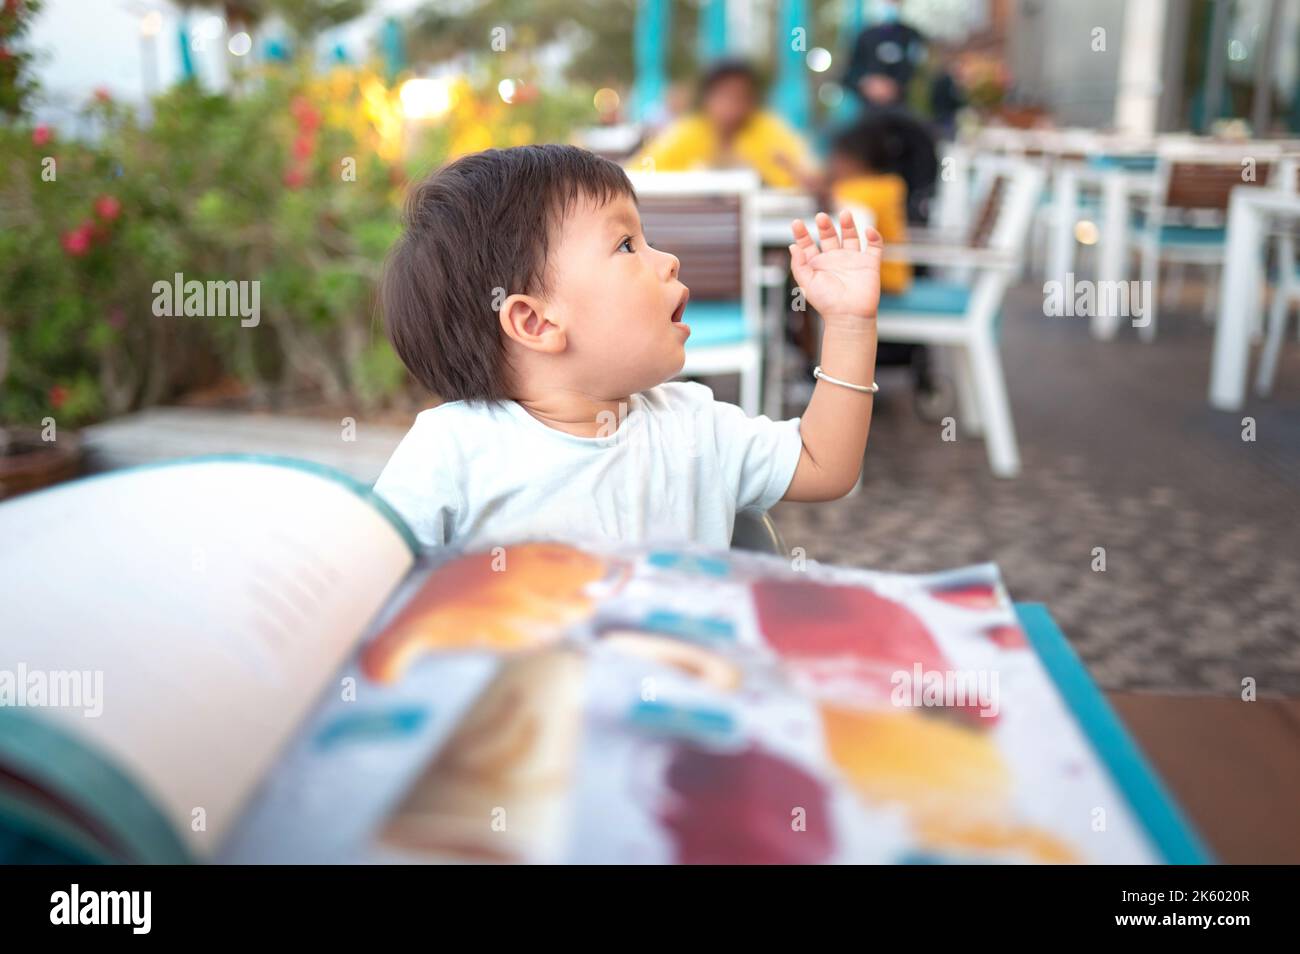 Handsome mixed race one year old baby boy calling the waiter to order and choose his meal in an unrecognizable restaurant Stock Photo